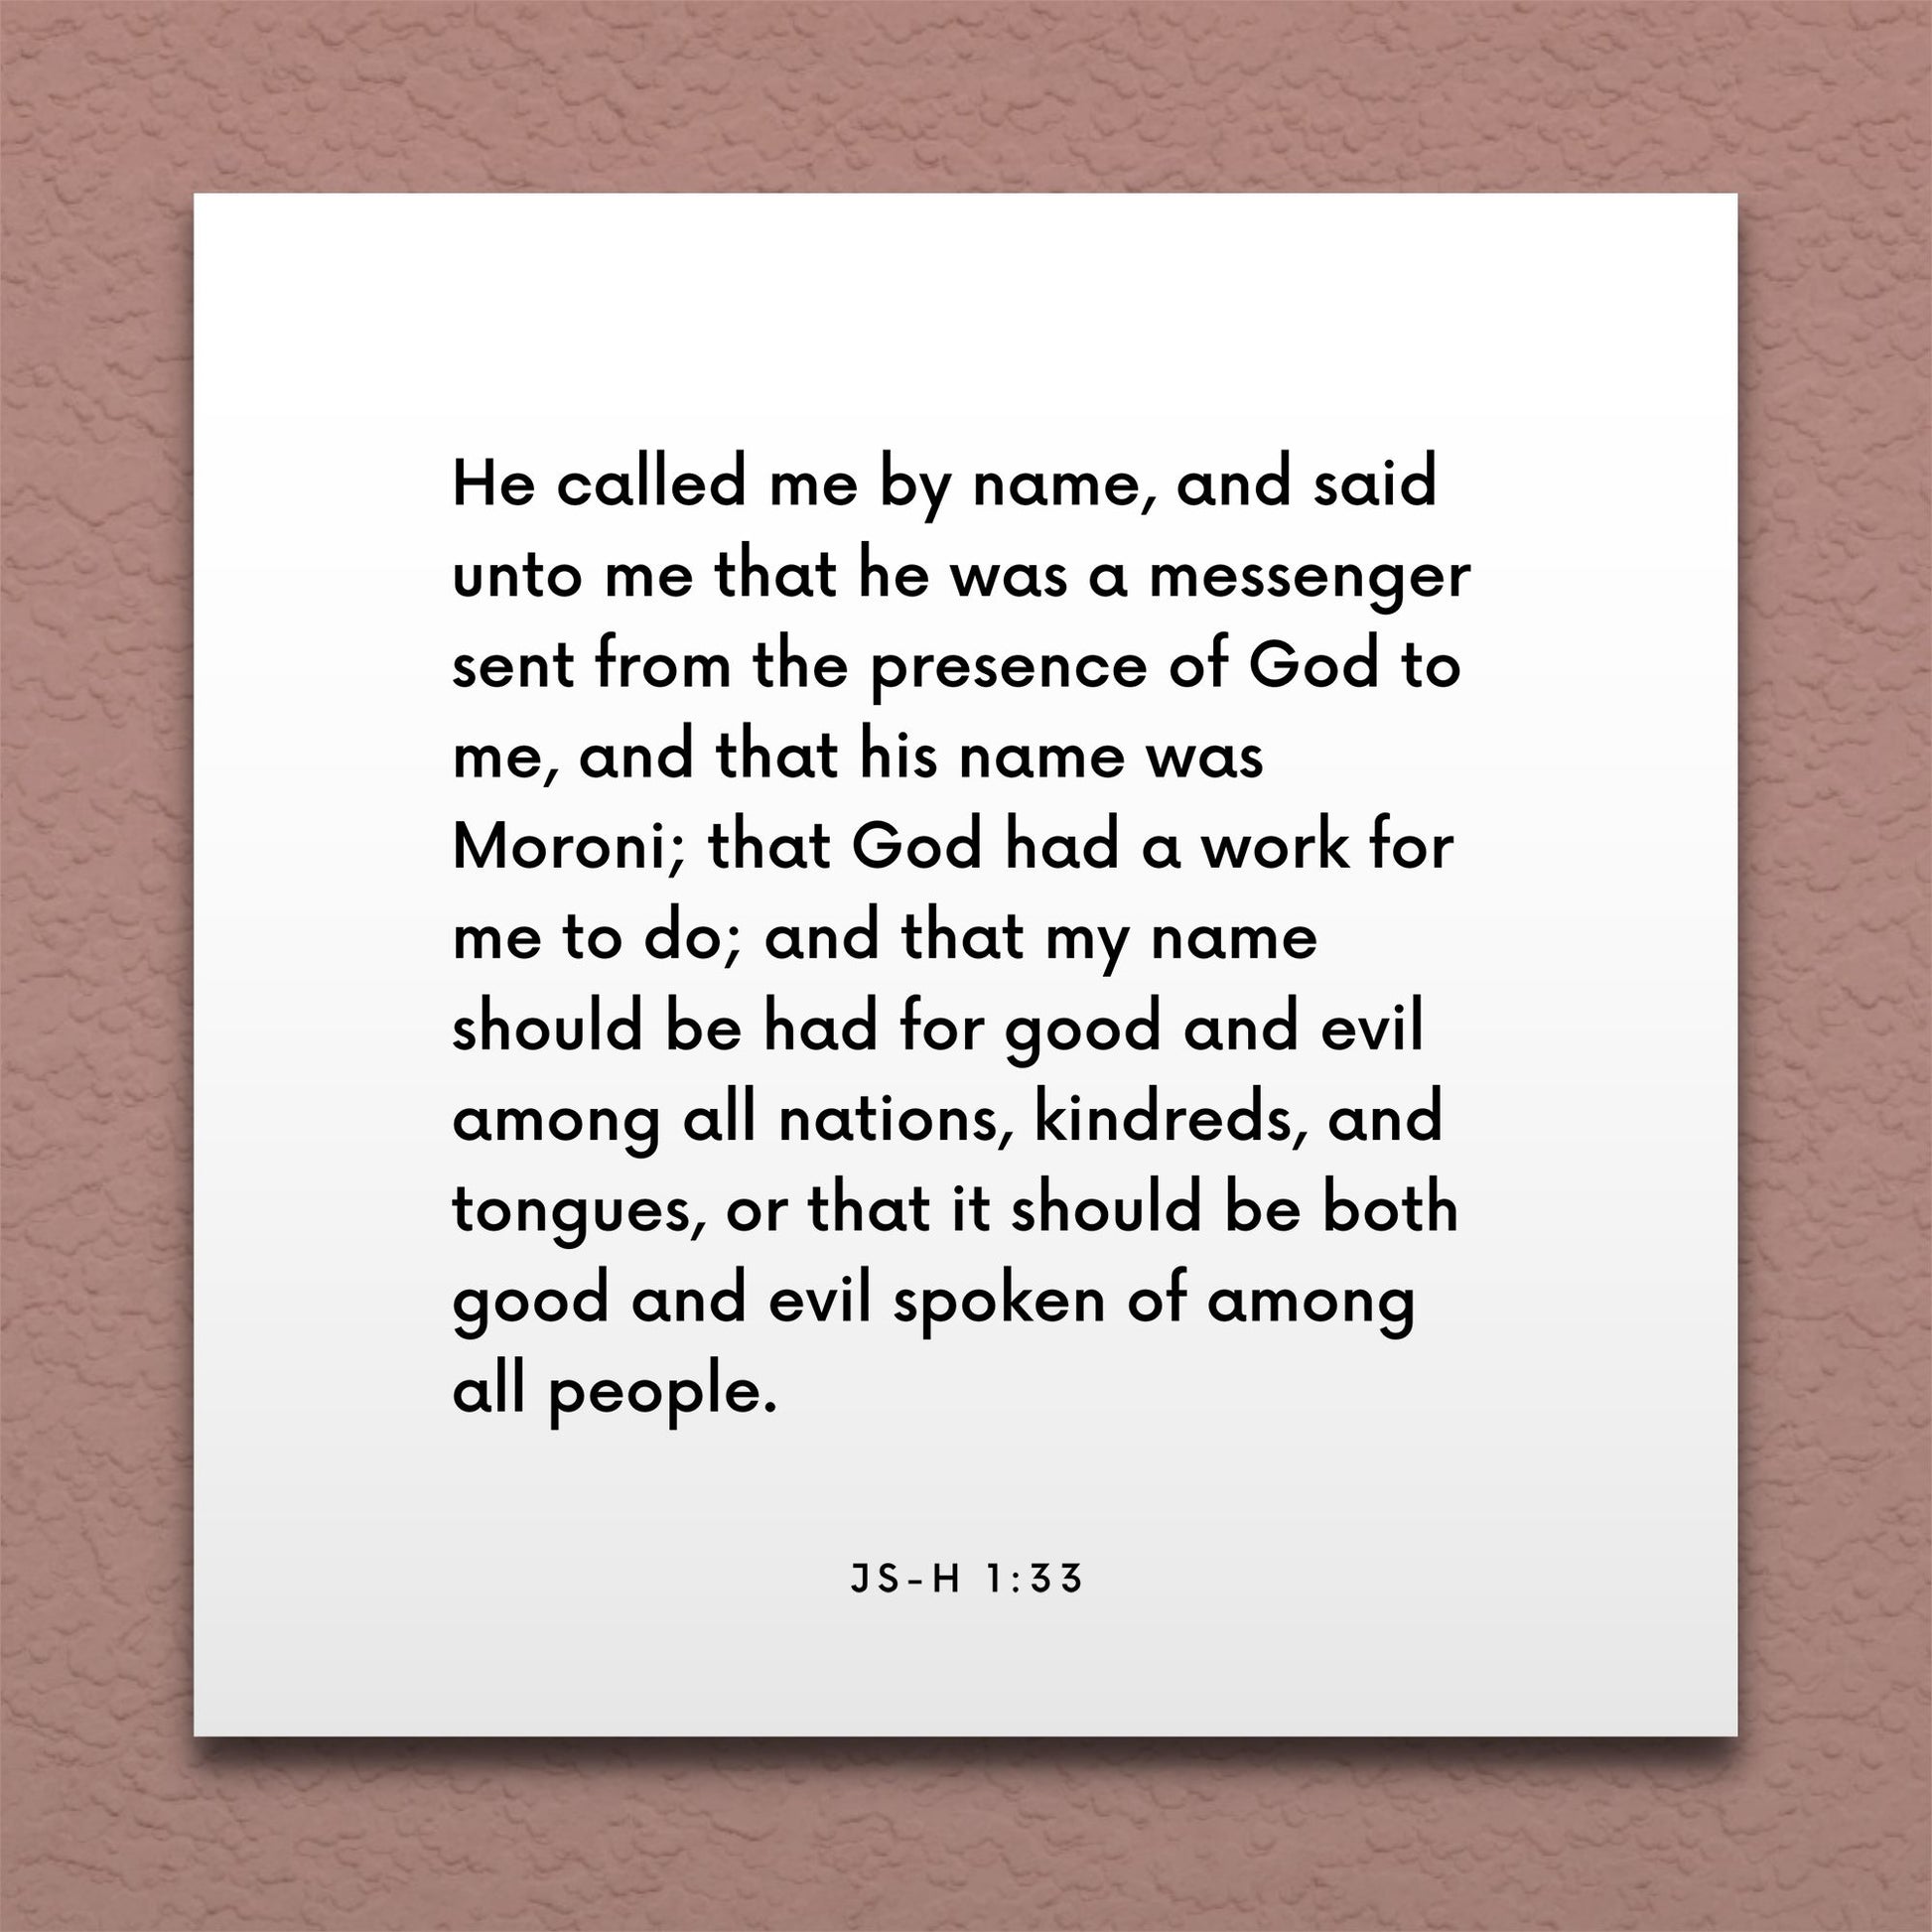 Wall-mounted scripture tile for JS-H 1:33 - "My name should be had for good and evil among all nations"